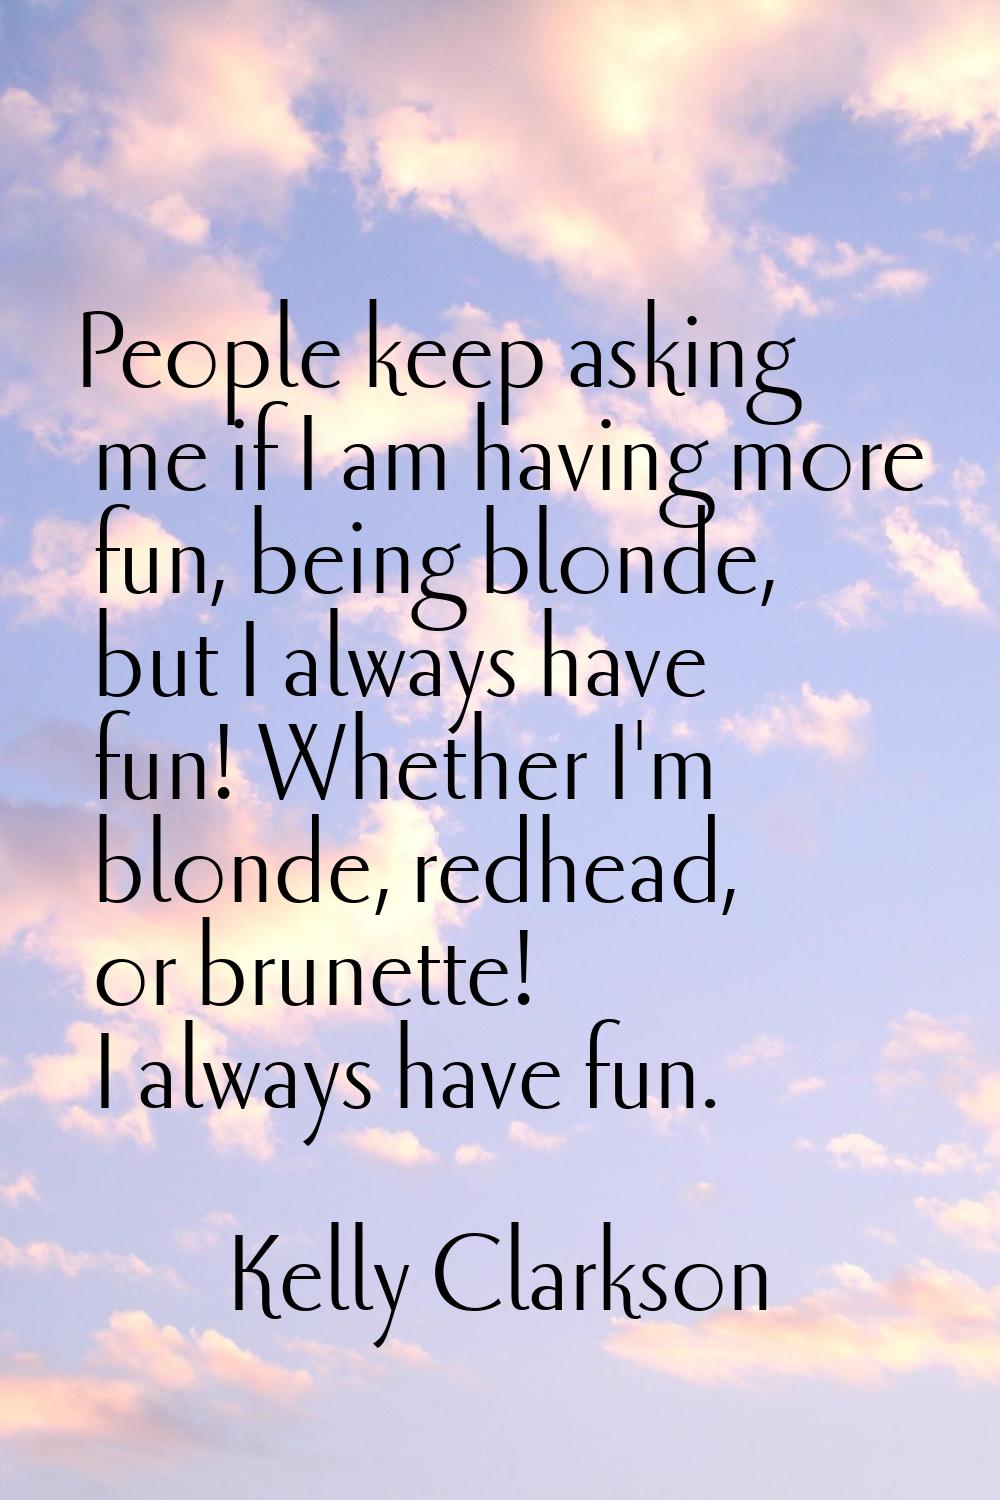 People keep asking me if I am having more fun, being blonde, but I always have fun! Whether I'm blo